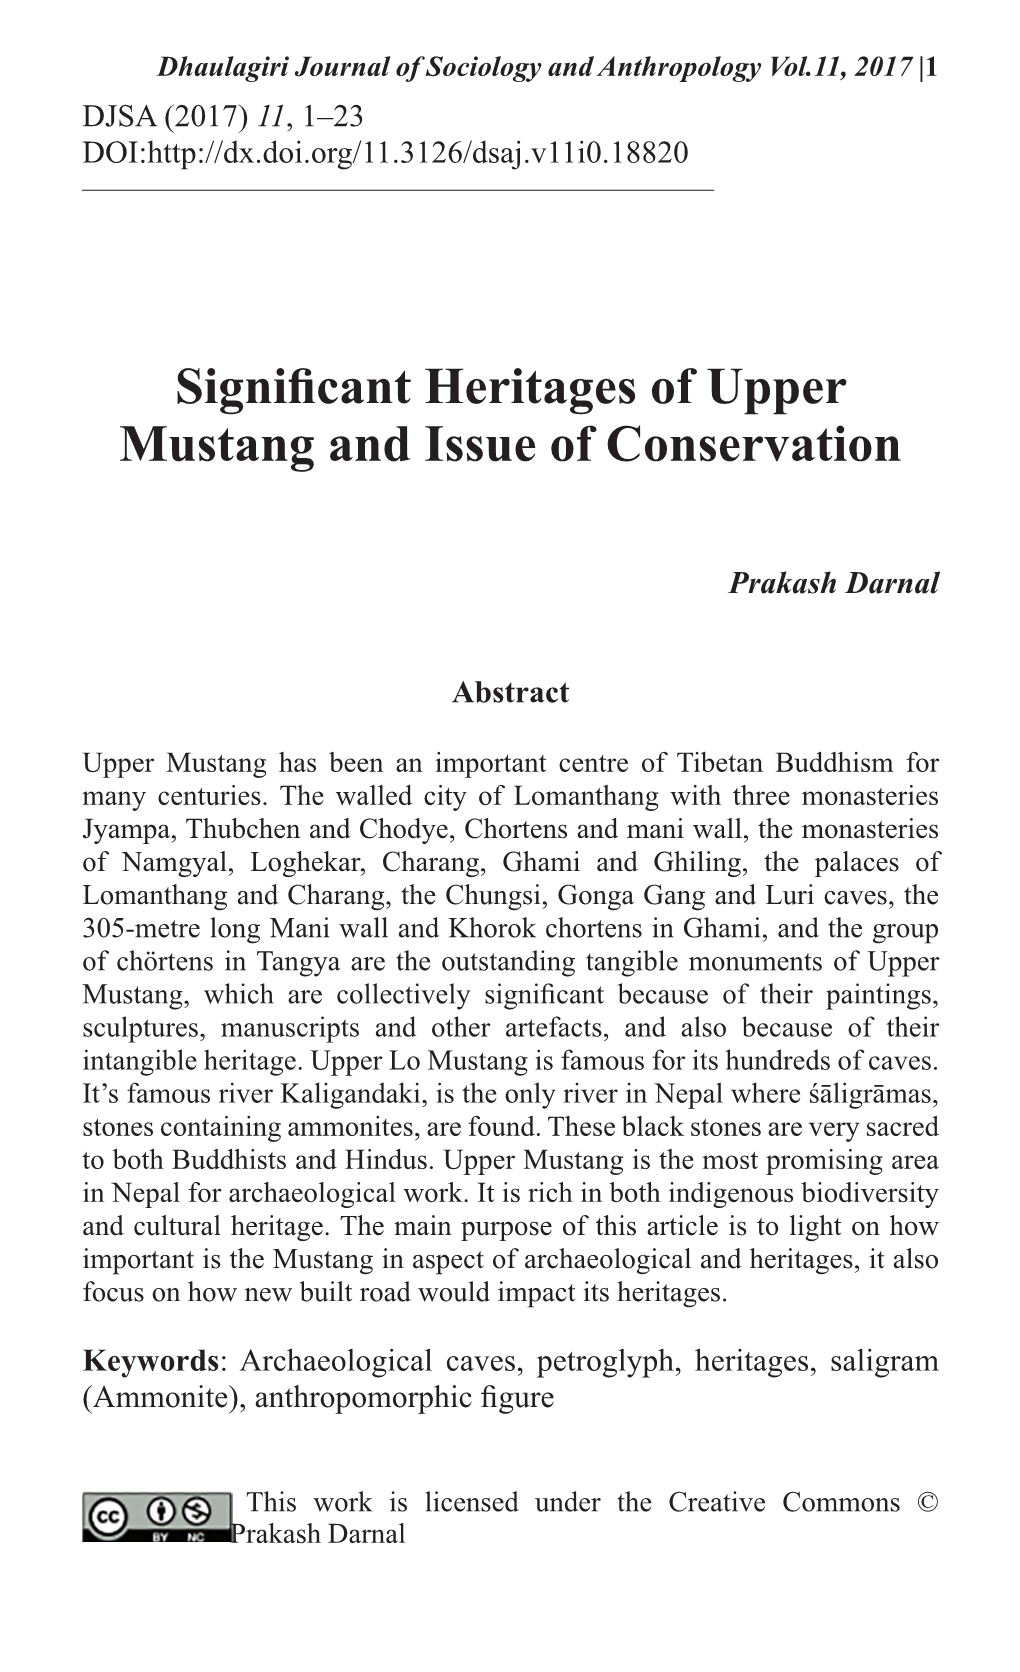 Significant Heritages of Upper Mustang and Issue of Conservation